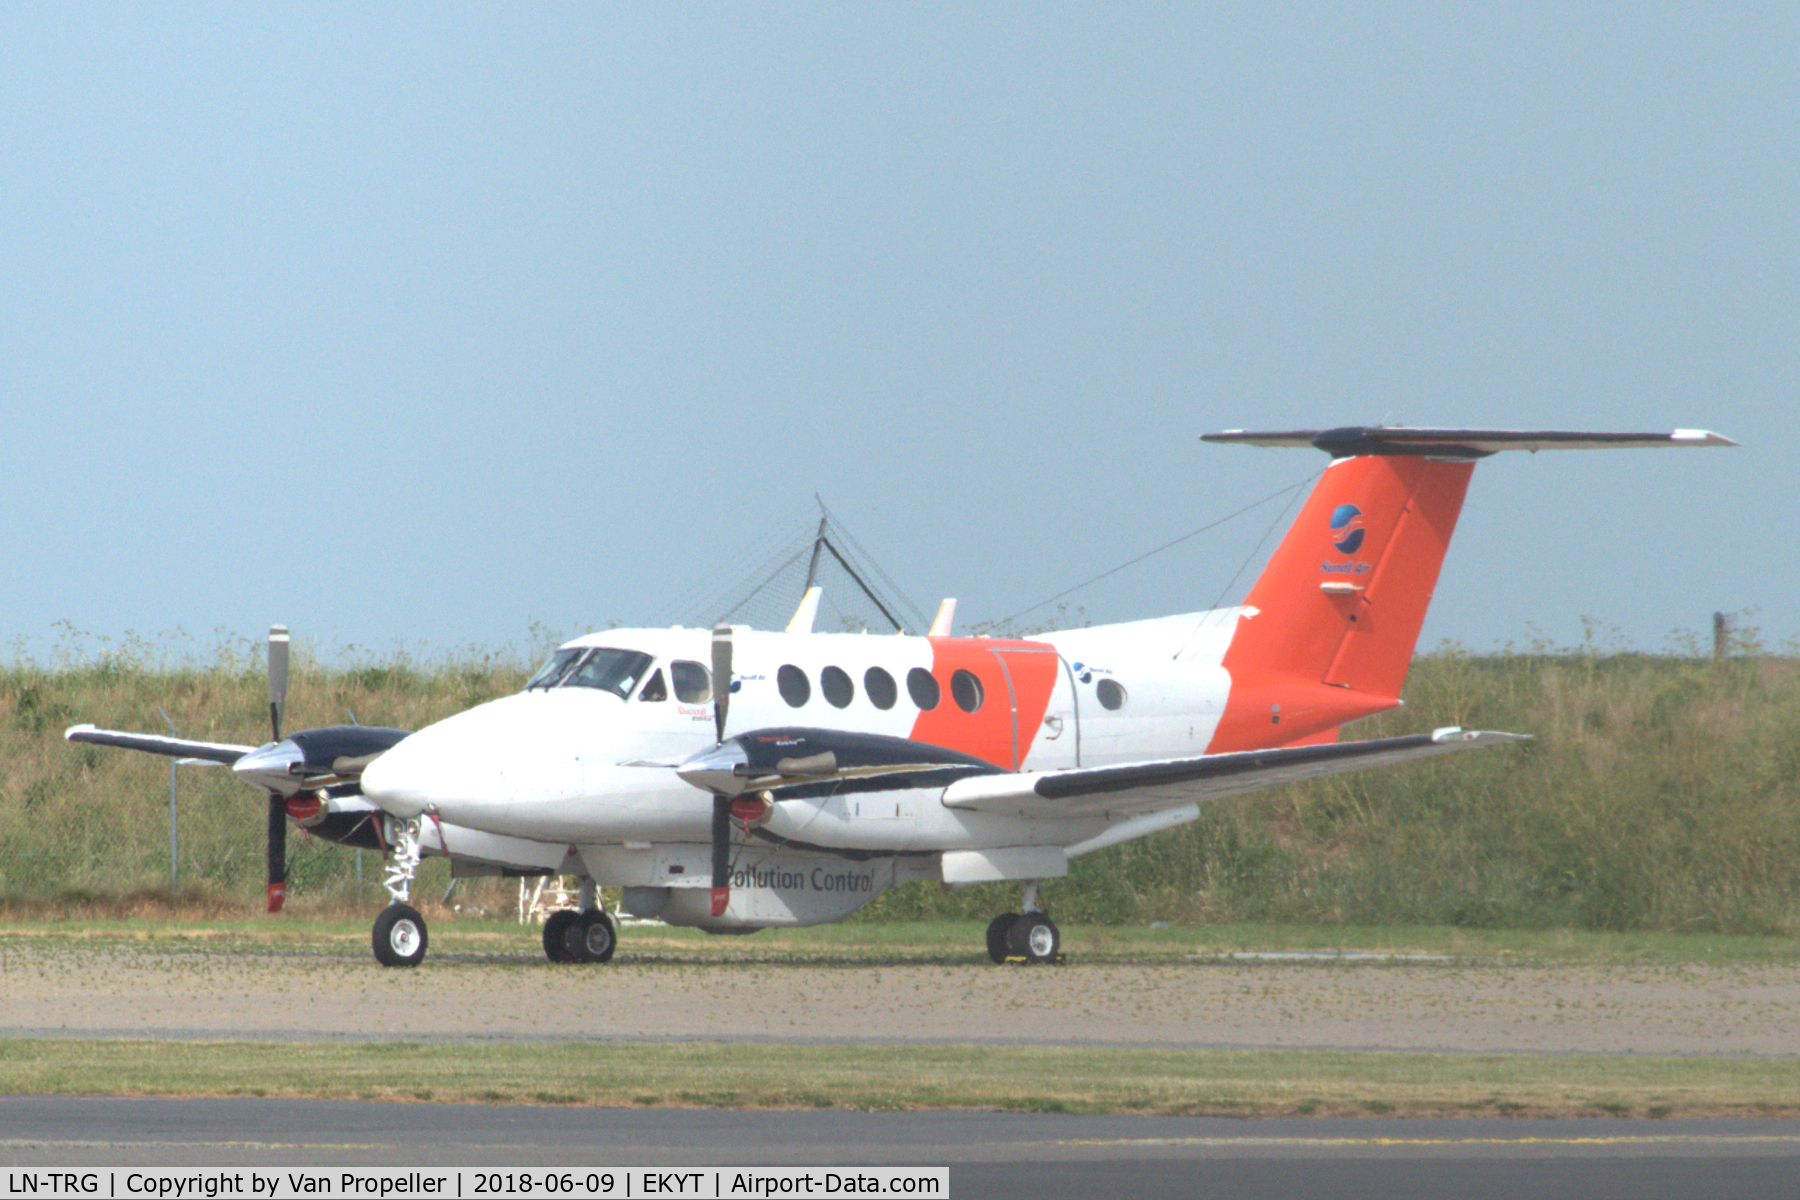 LN-TRG, 2006 Raytheon B200 King Air C/N BB-1936, Beechcraft Super King Air B200 of Sundt Air operated for Norwegian Coast Guard in maritime surveillance role at Aalborg airport, Denmark